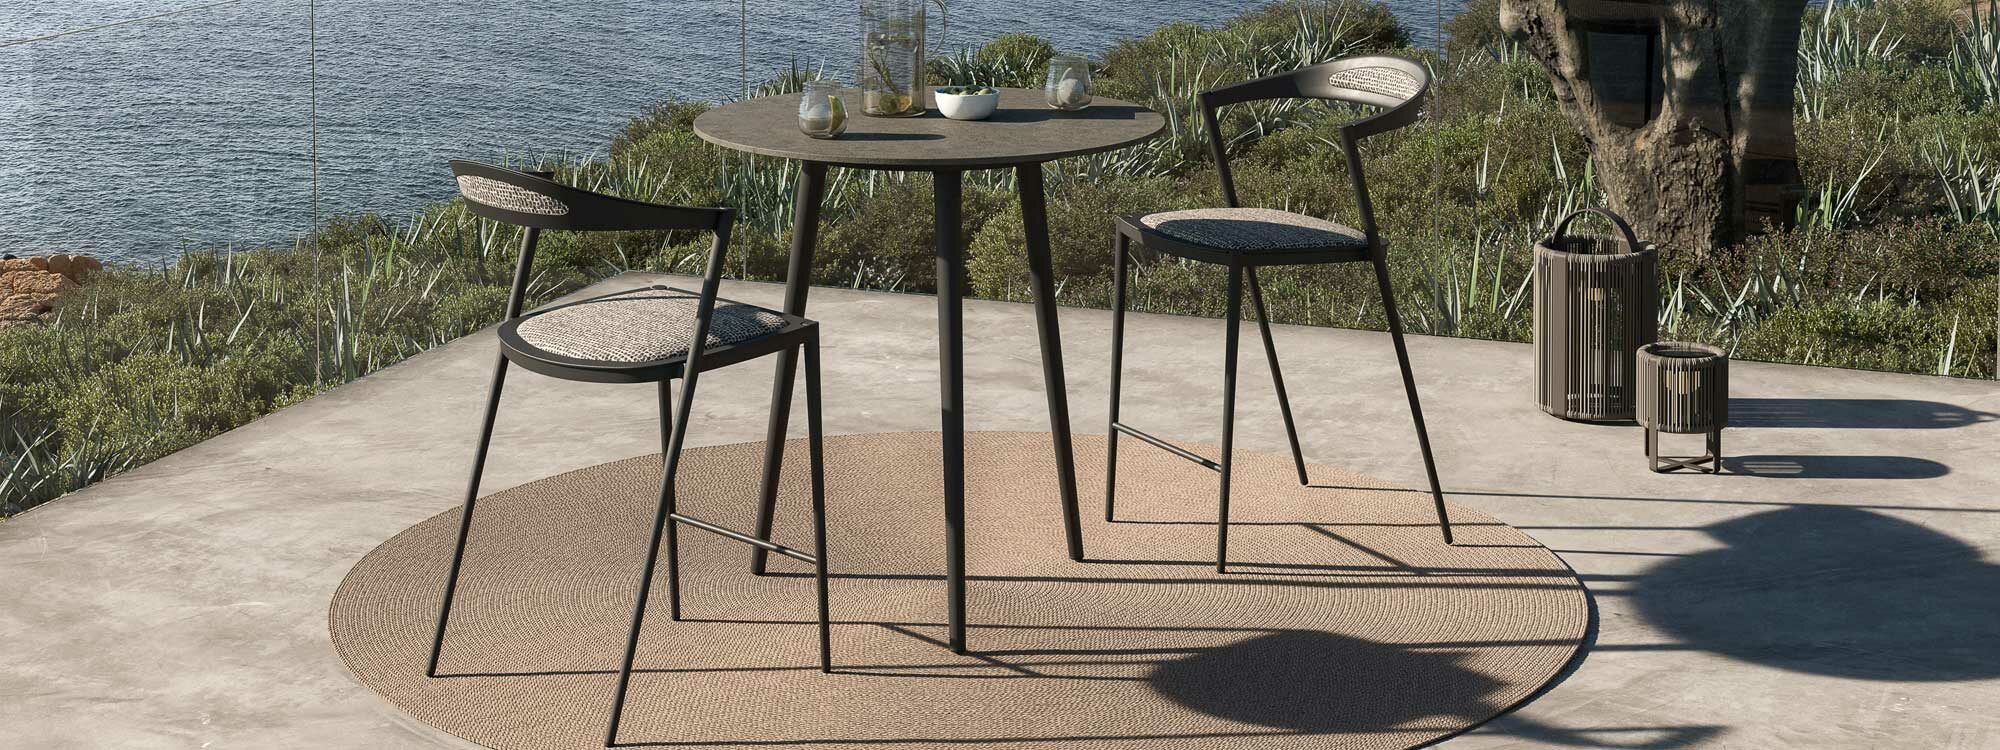 Image of Royal Botania Styletto high bar table and bar stools on sunny terrace overlooking the sea